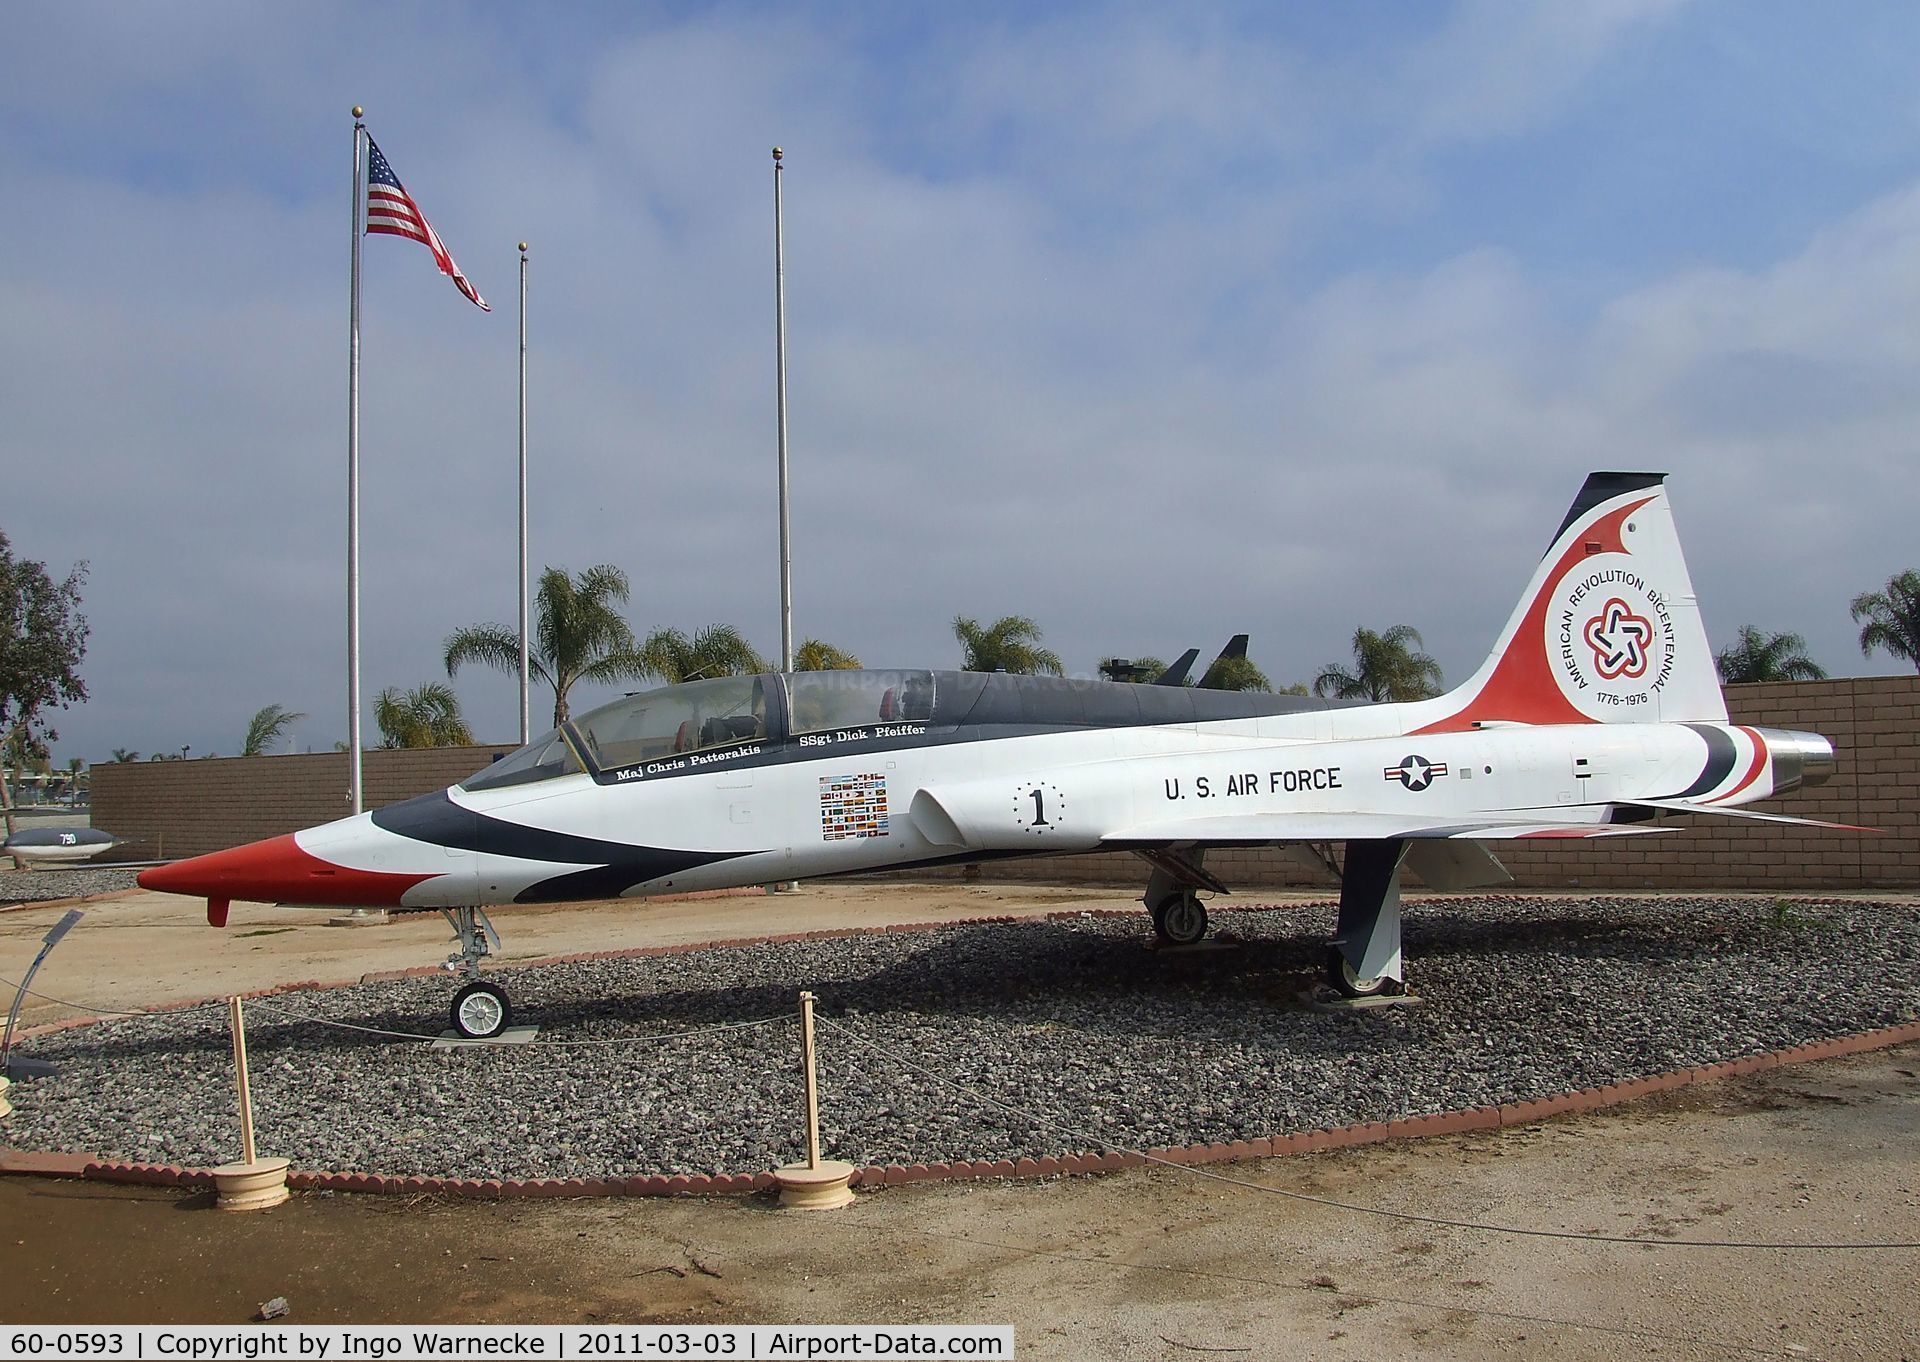 60-0593, 1961 Northrop T-38A Talon C/N N.5166, Northrop T-38A Talon - painted to represent an aircraft used by the 